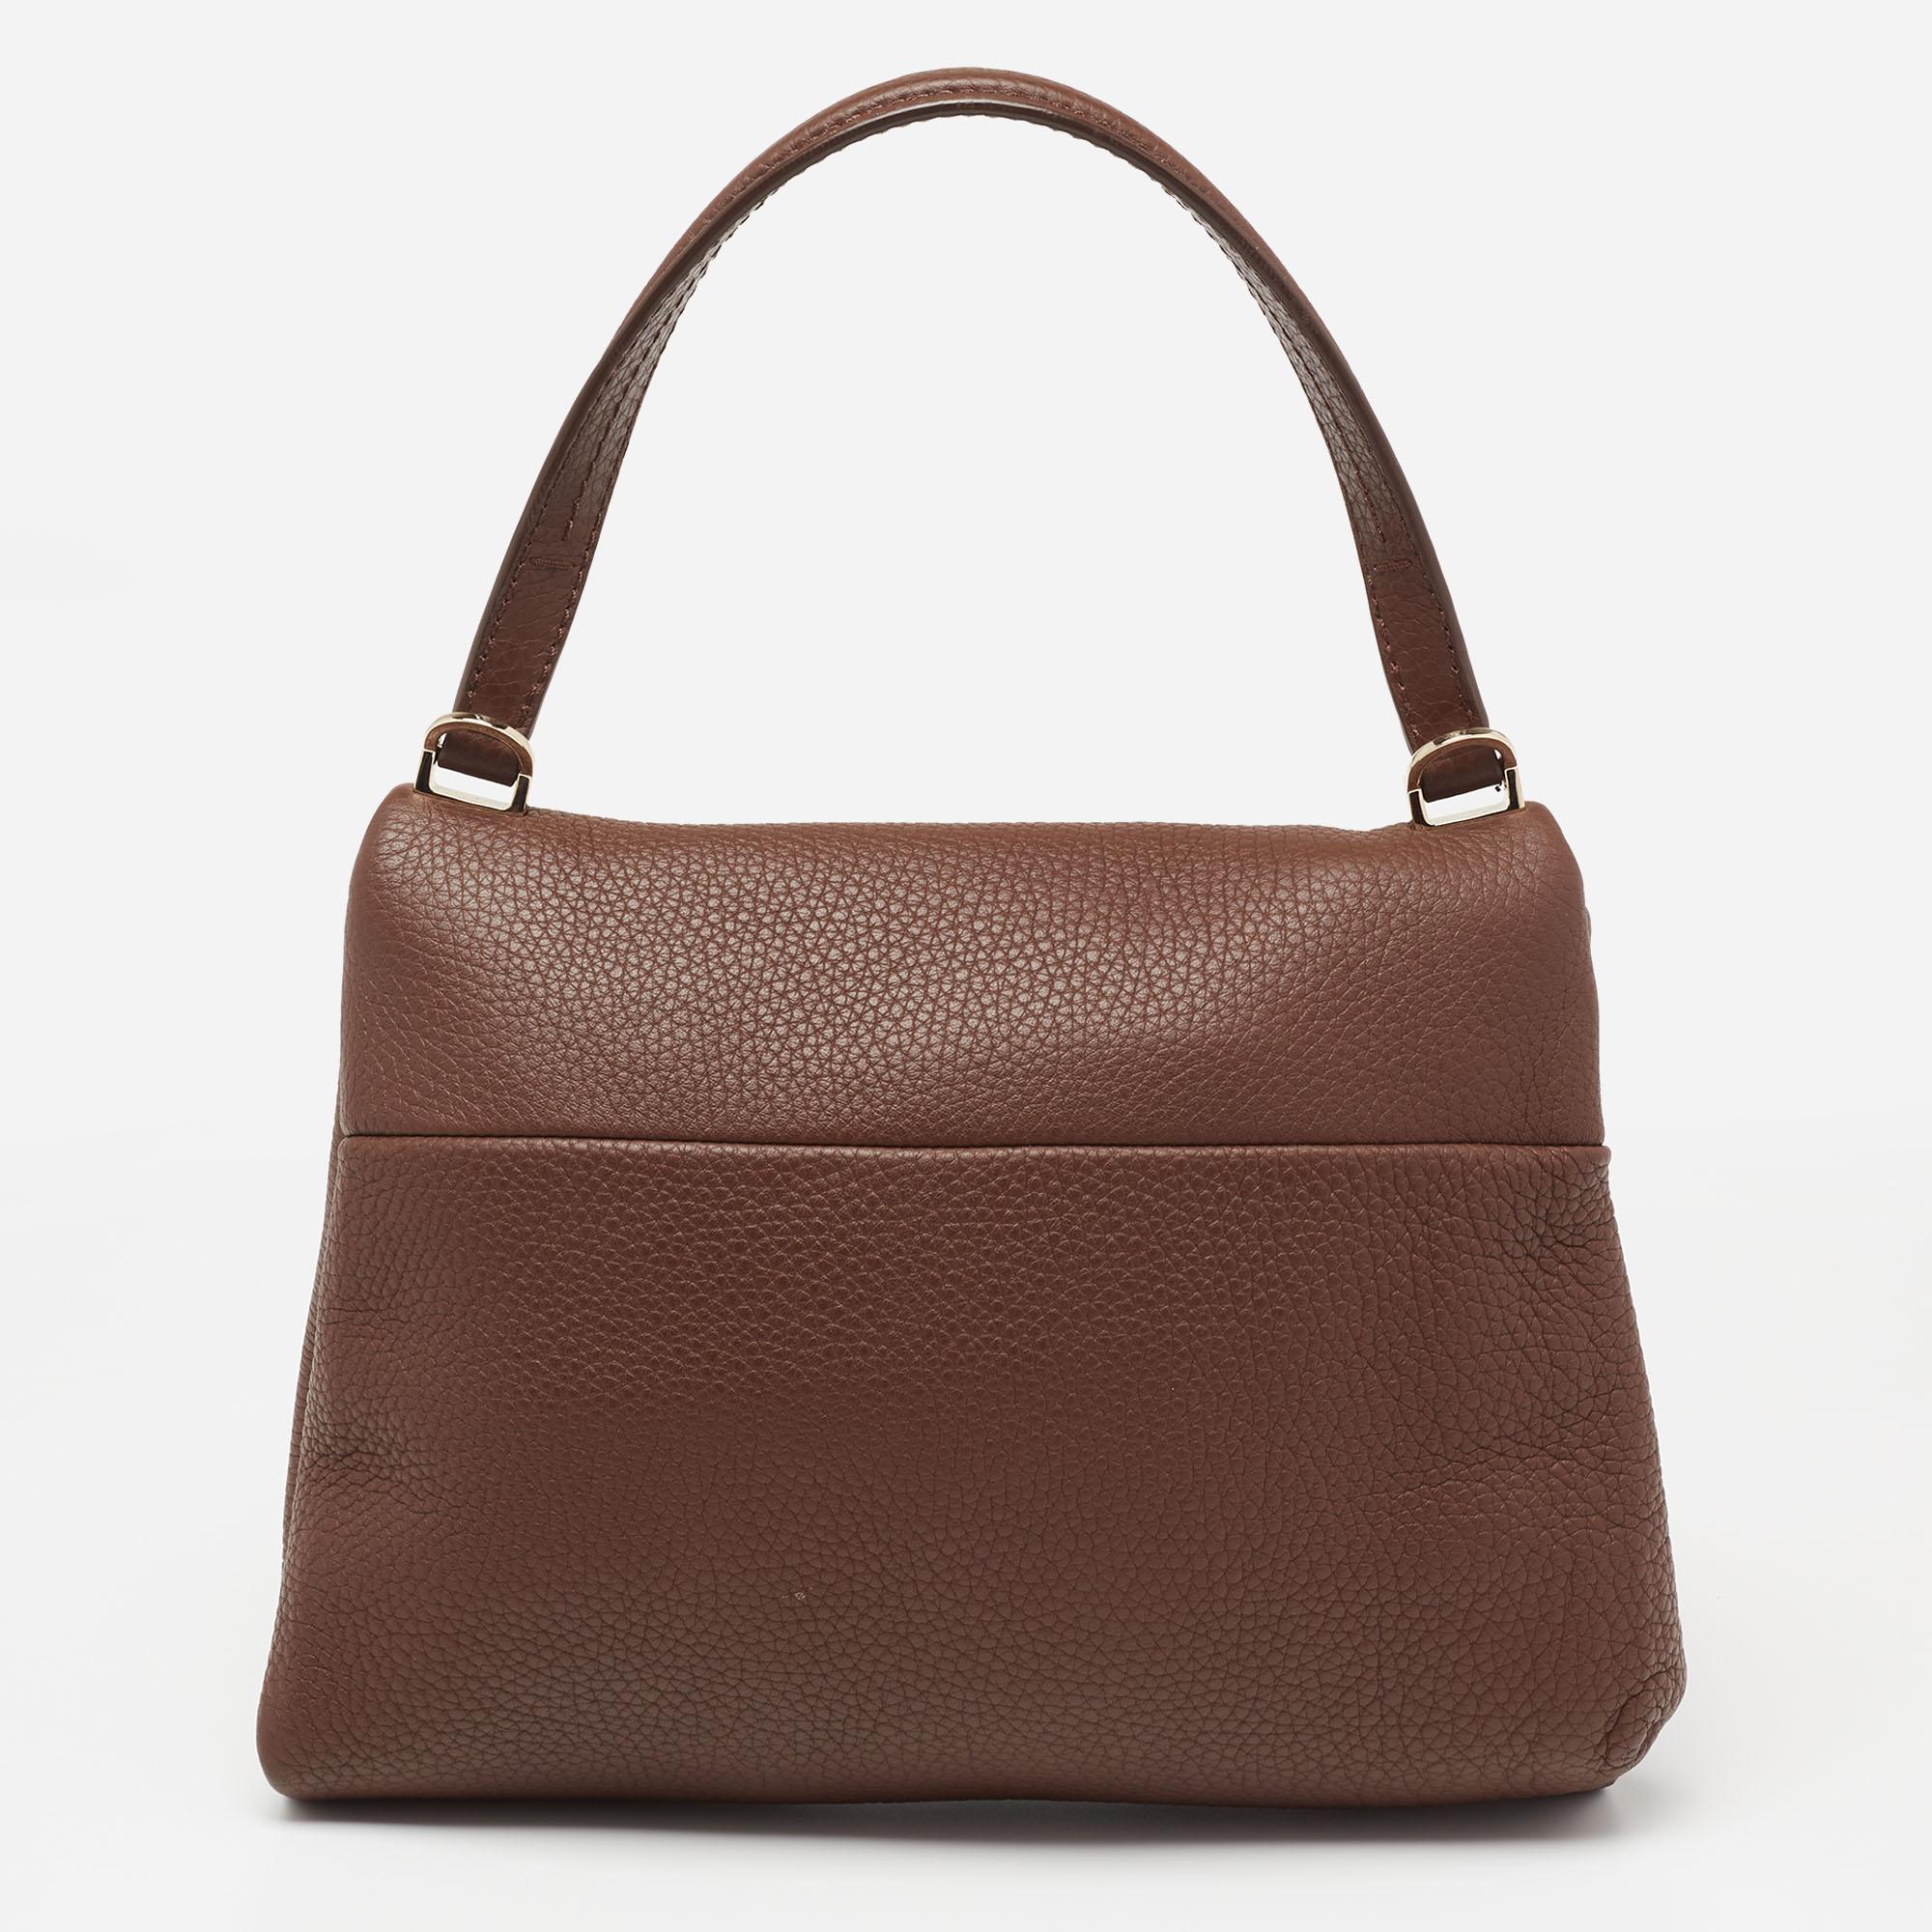 This dark brown bag comes from CH Carolina Herrera. Crafted from textured leather, it has a lined interior that ensures to house your everyday essentials effortlessly. The top handle bag is complete with a metal trim on the flap.

Includes: Original